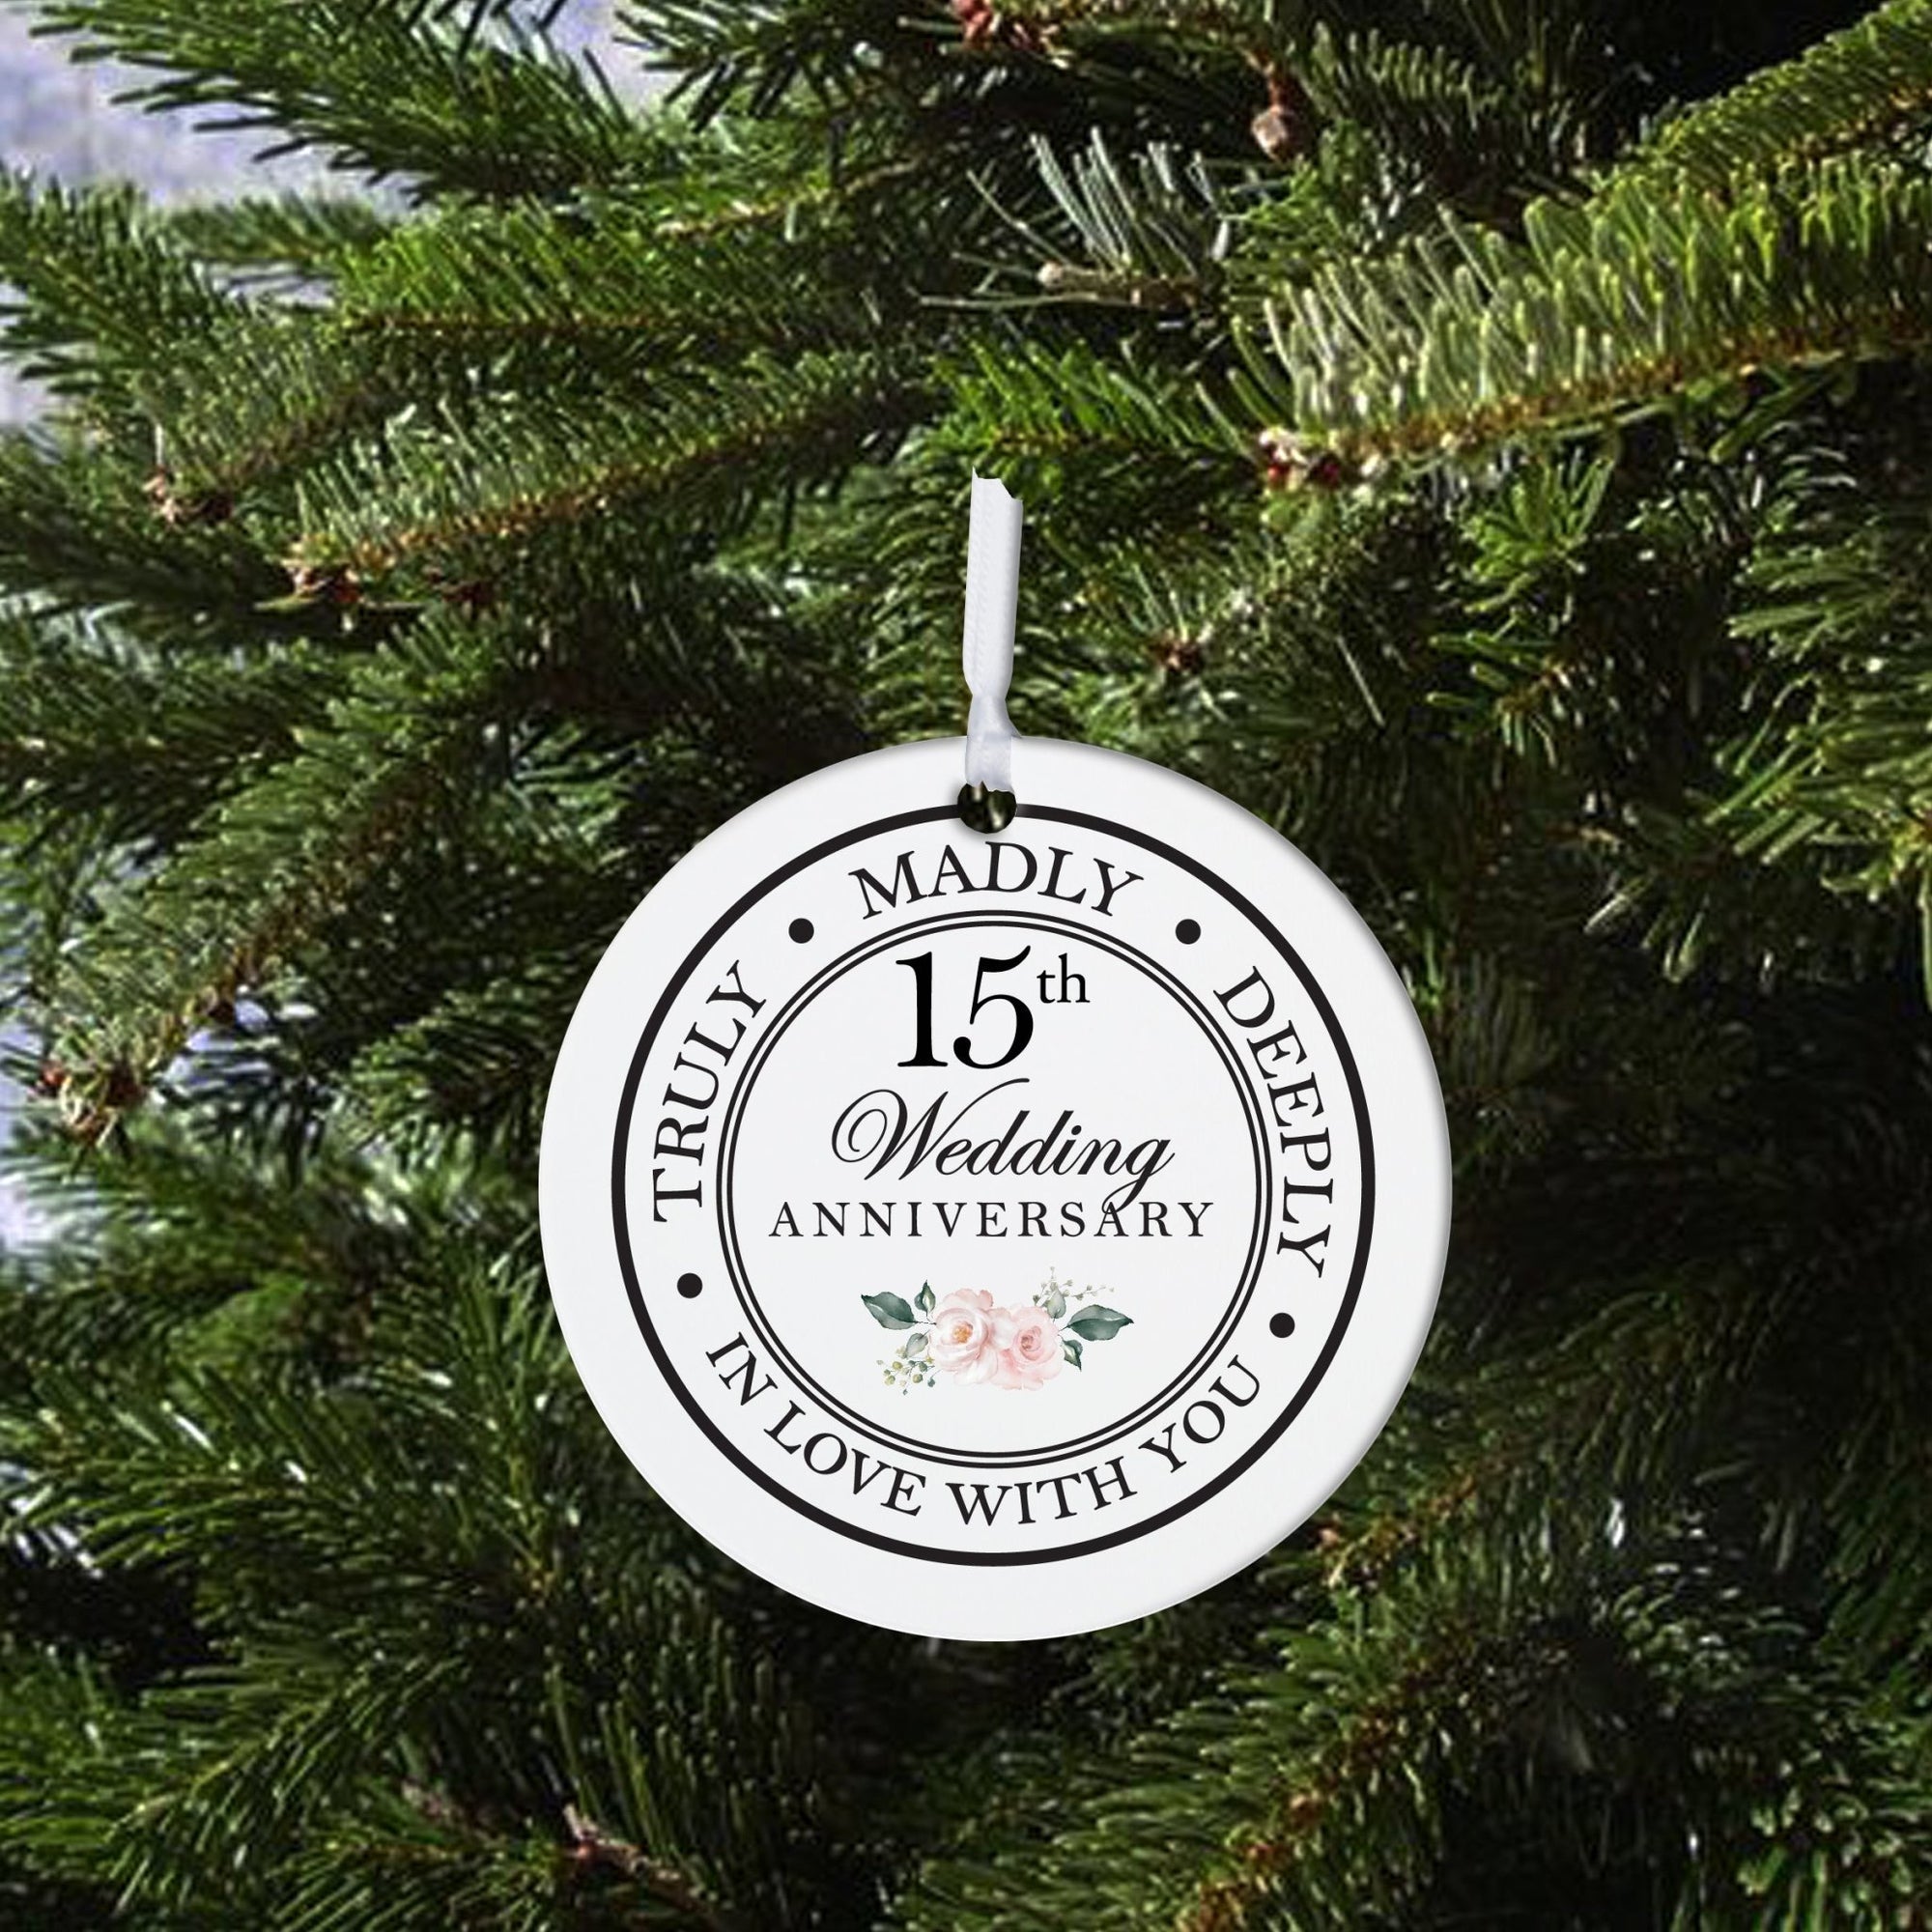 15th Wedding Anniversary White Ornament With Inspirational Message Gift Ideas - Truly, Madly, Deeply In Love With You - LifeSong Milestones